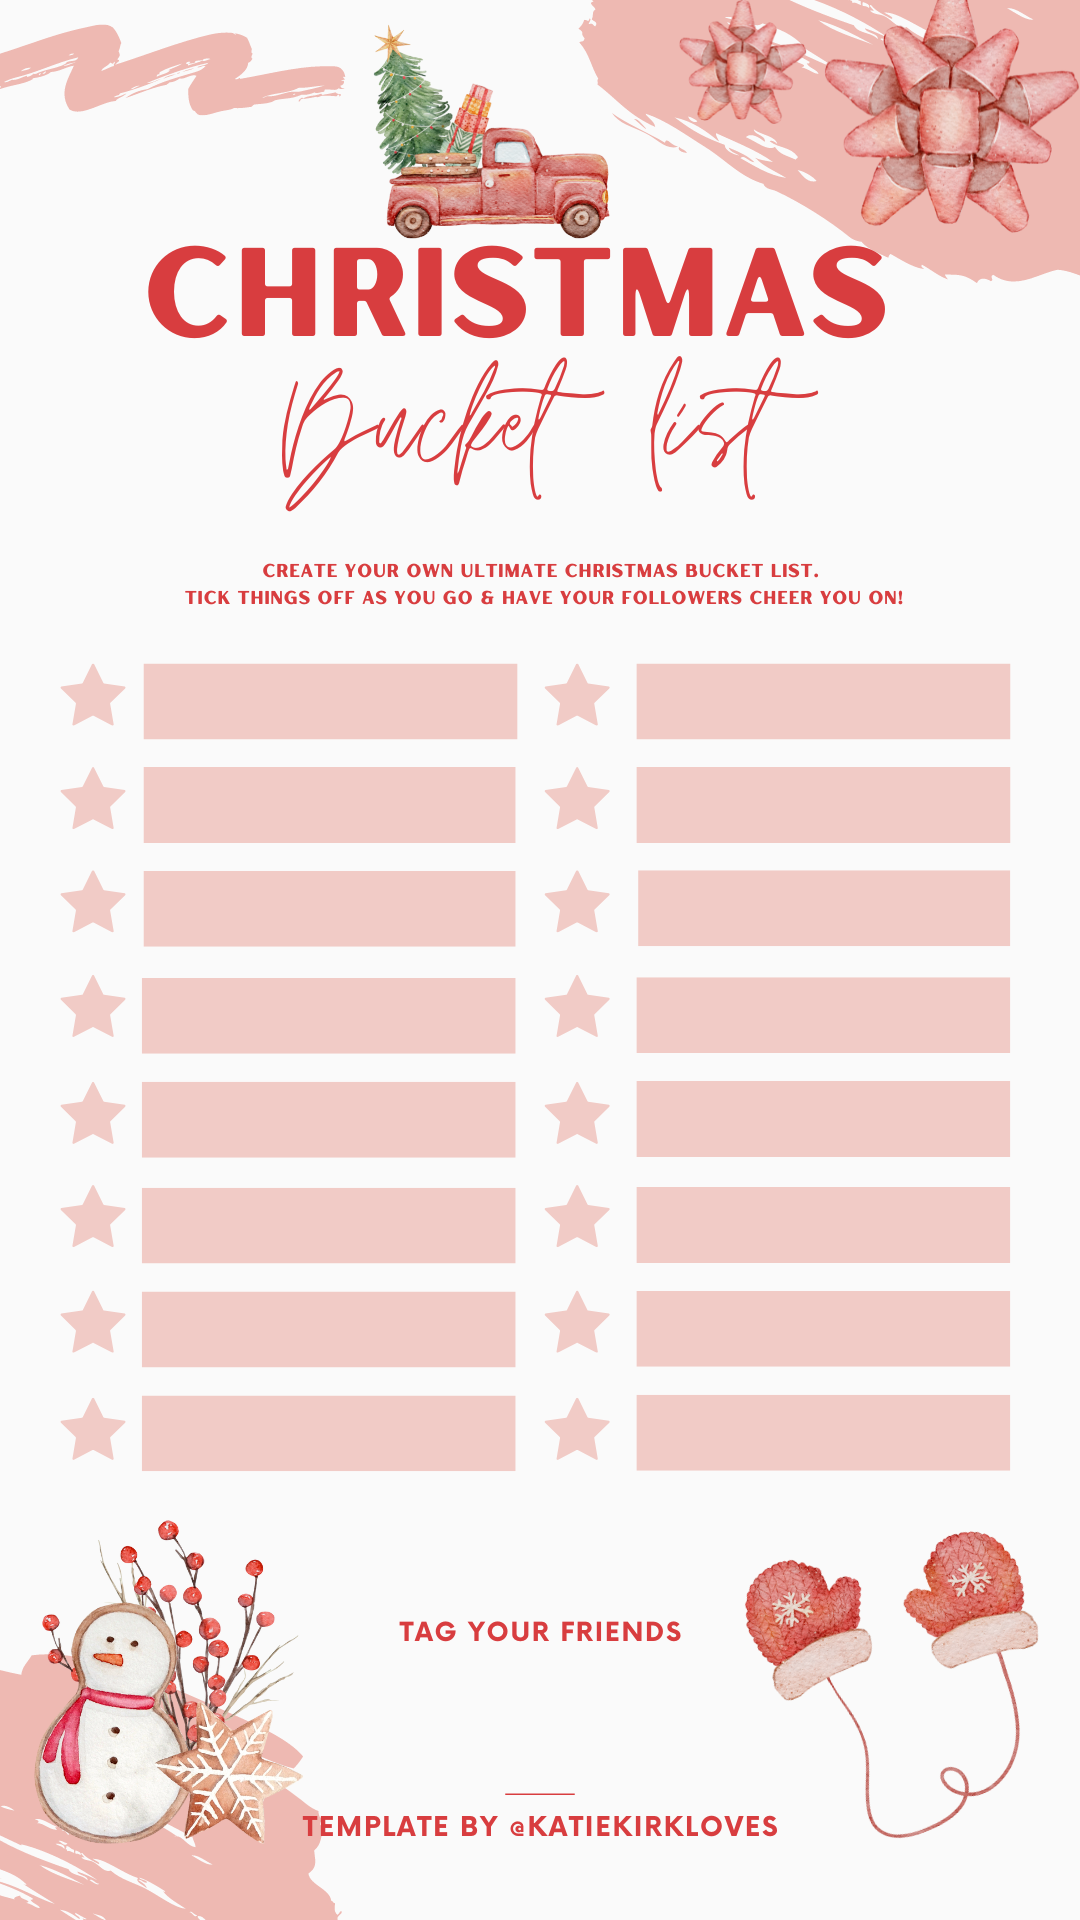 Instagram Story Templates by UK Creator Katie Kirk Loves. These are Christmas themed templates you can use for fun, you share them on your Instagram story, fill them in and share with friends. They include Christmas themed this or that, Christmas bingo, Christmas bucket list challenge and which Christmas Activity is for you?